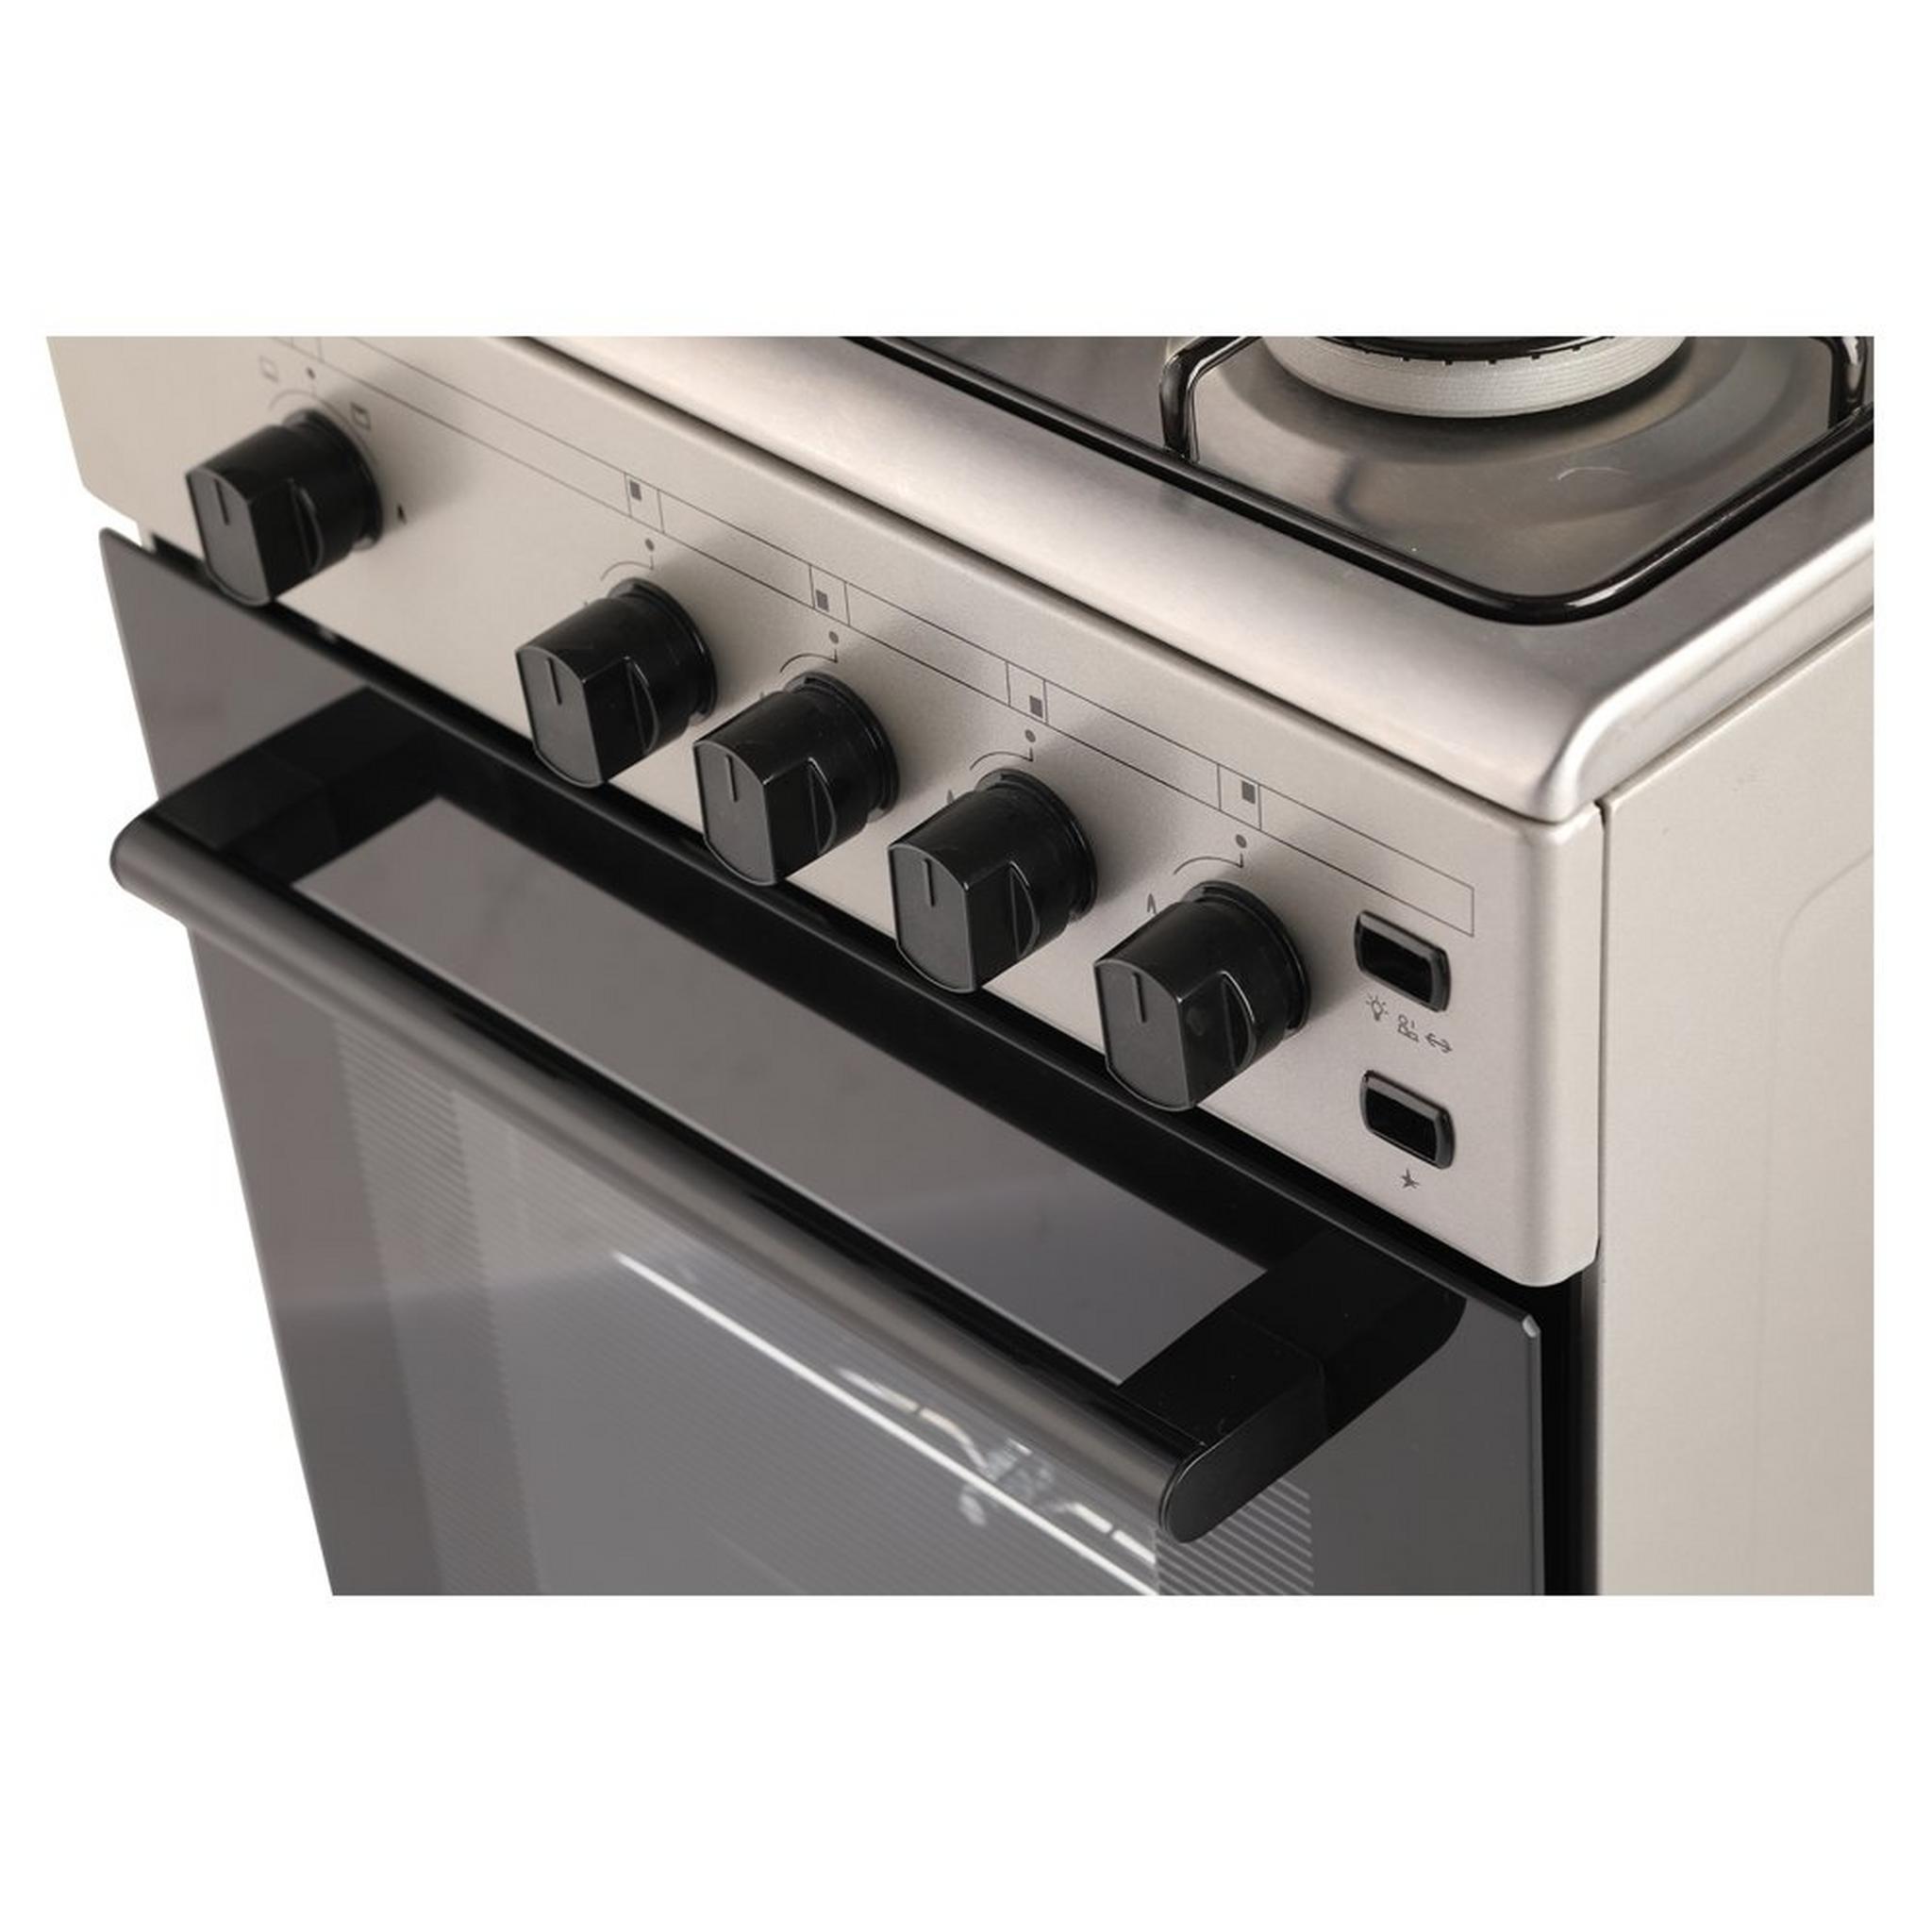 Wansa 50X50cm 4 Burner Gas Cooker, WCT4401XS - Stainless Steel